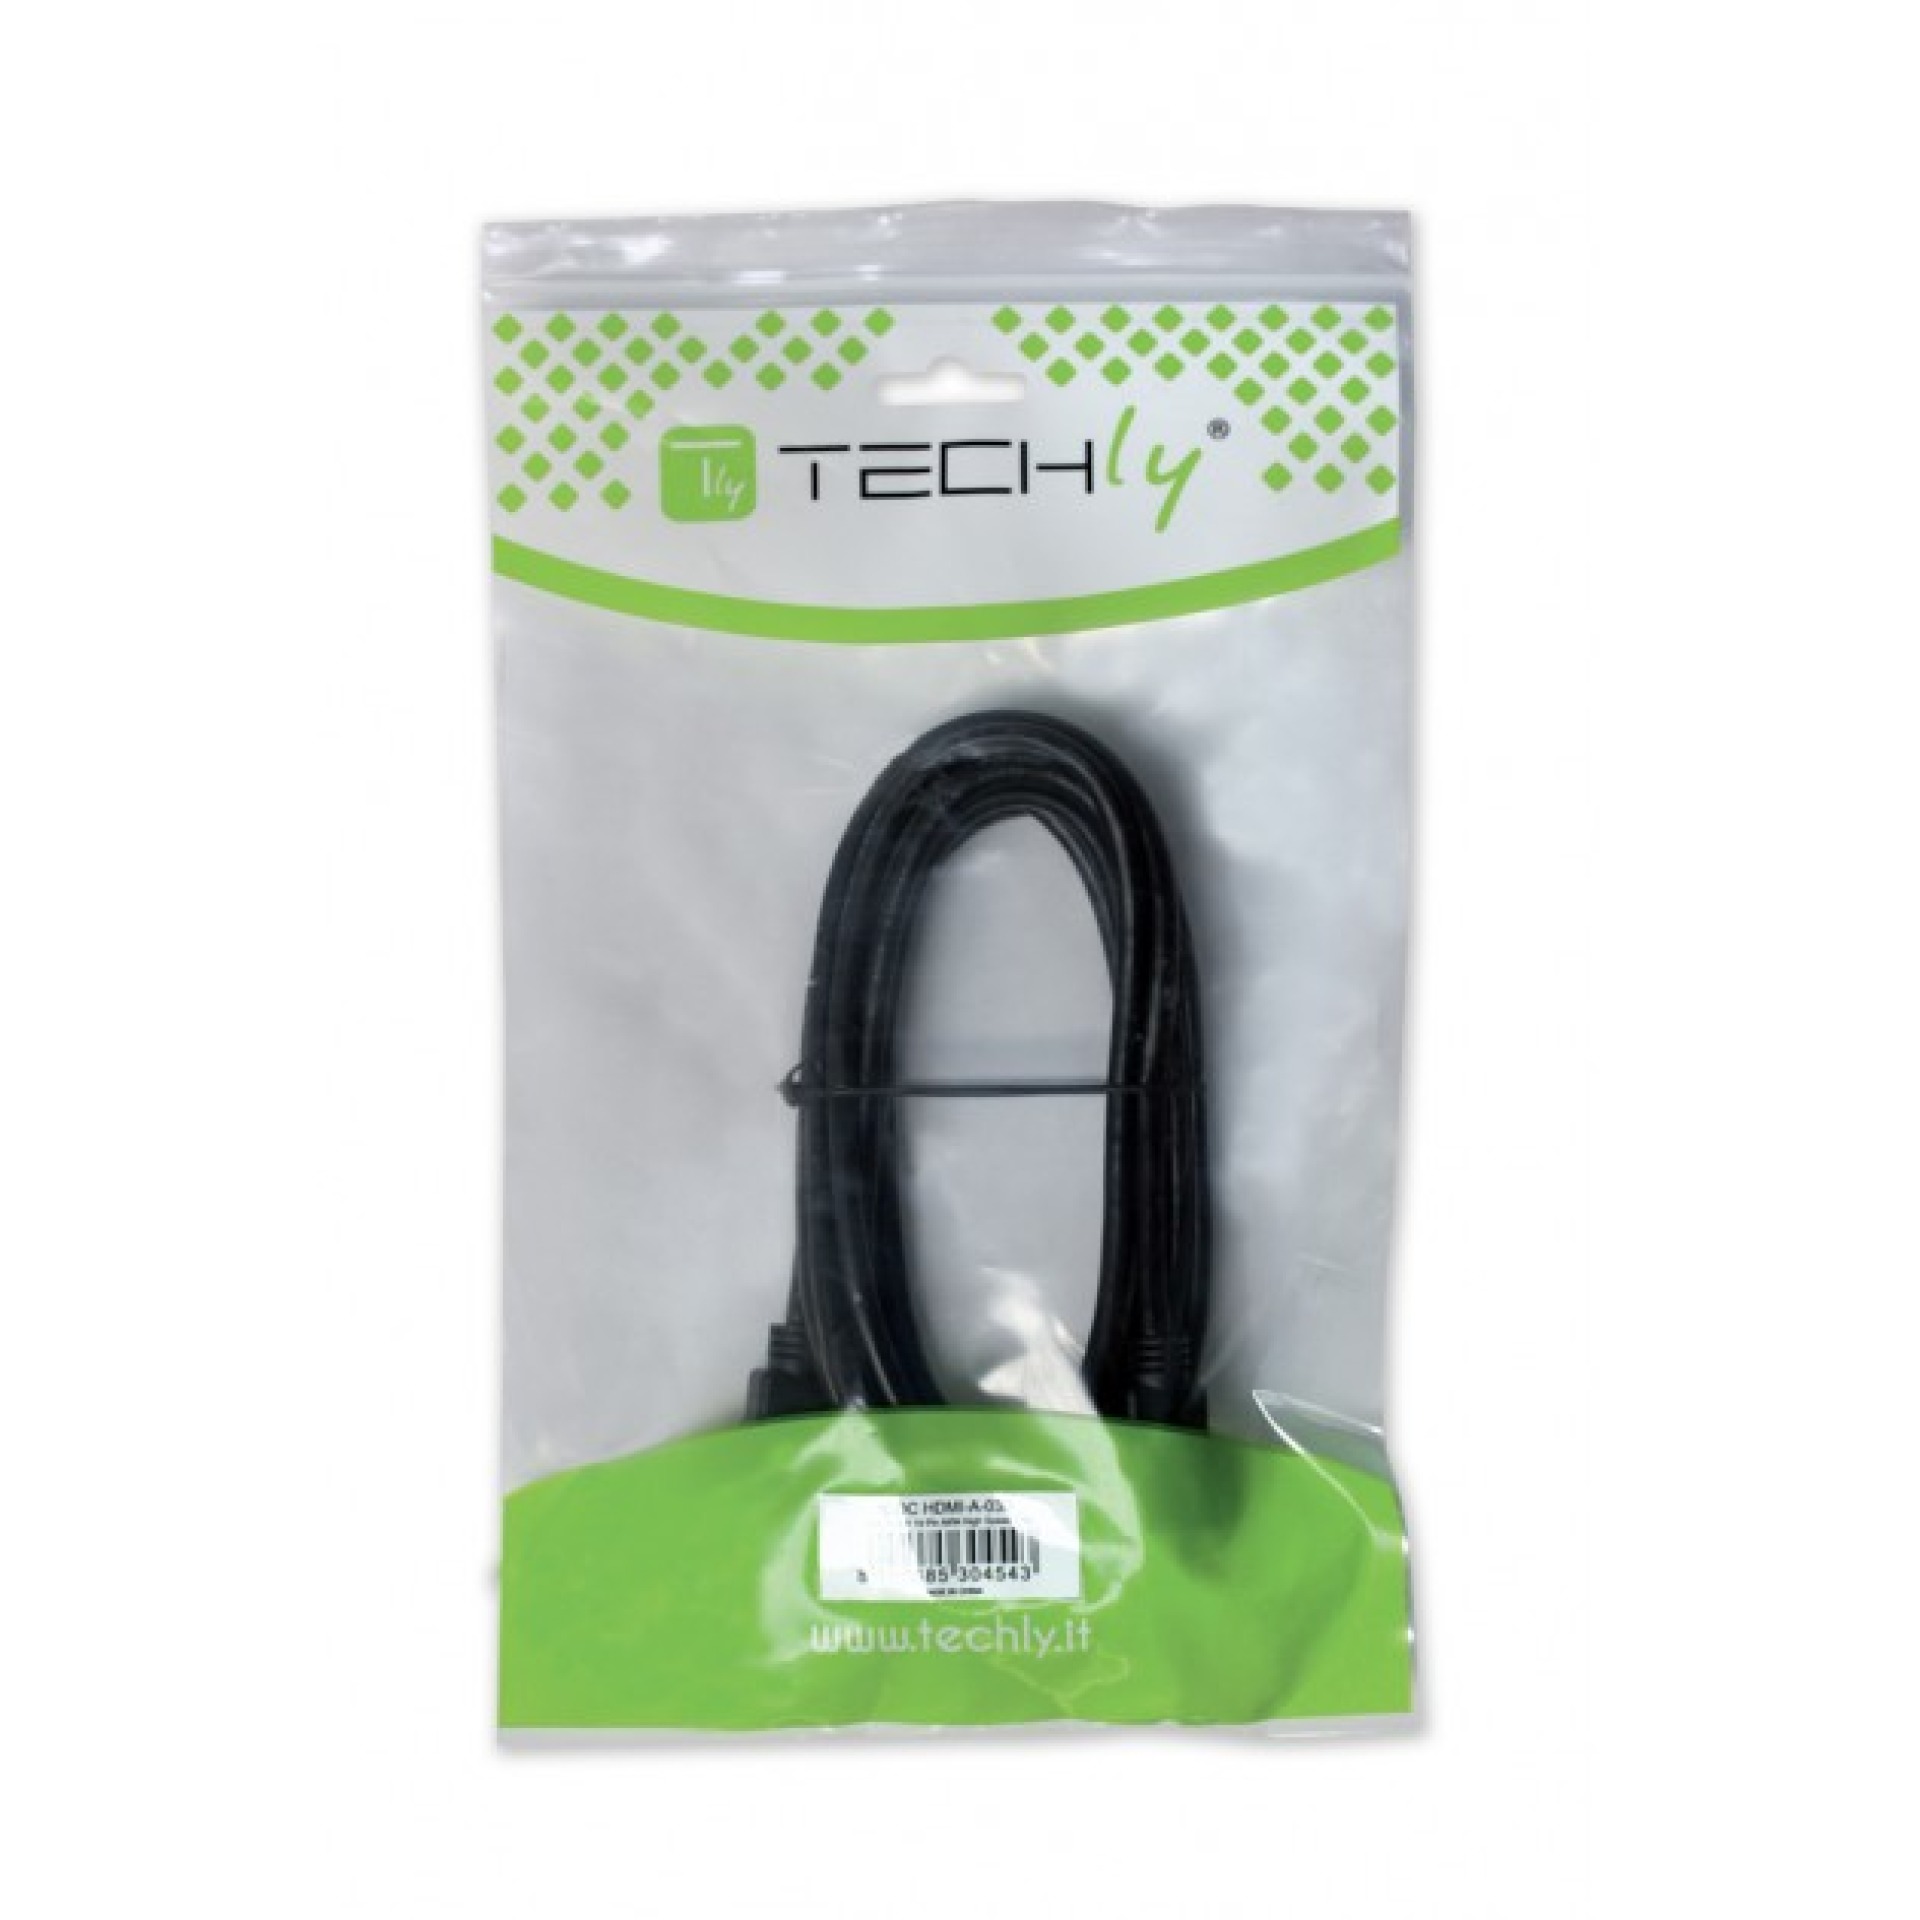 HDMI High Speed with Ethernet Extender Cable 4K 30Hz 1m